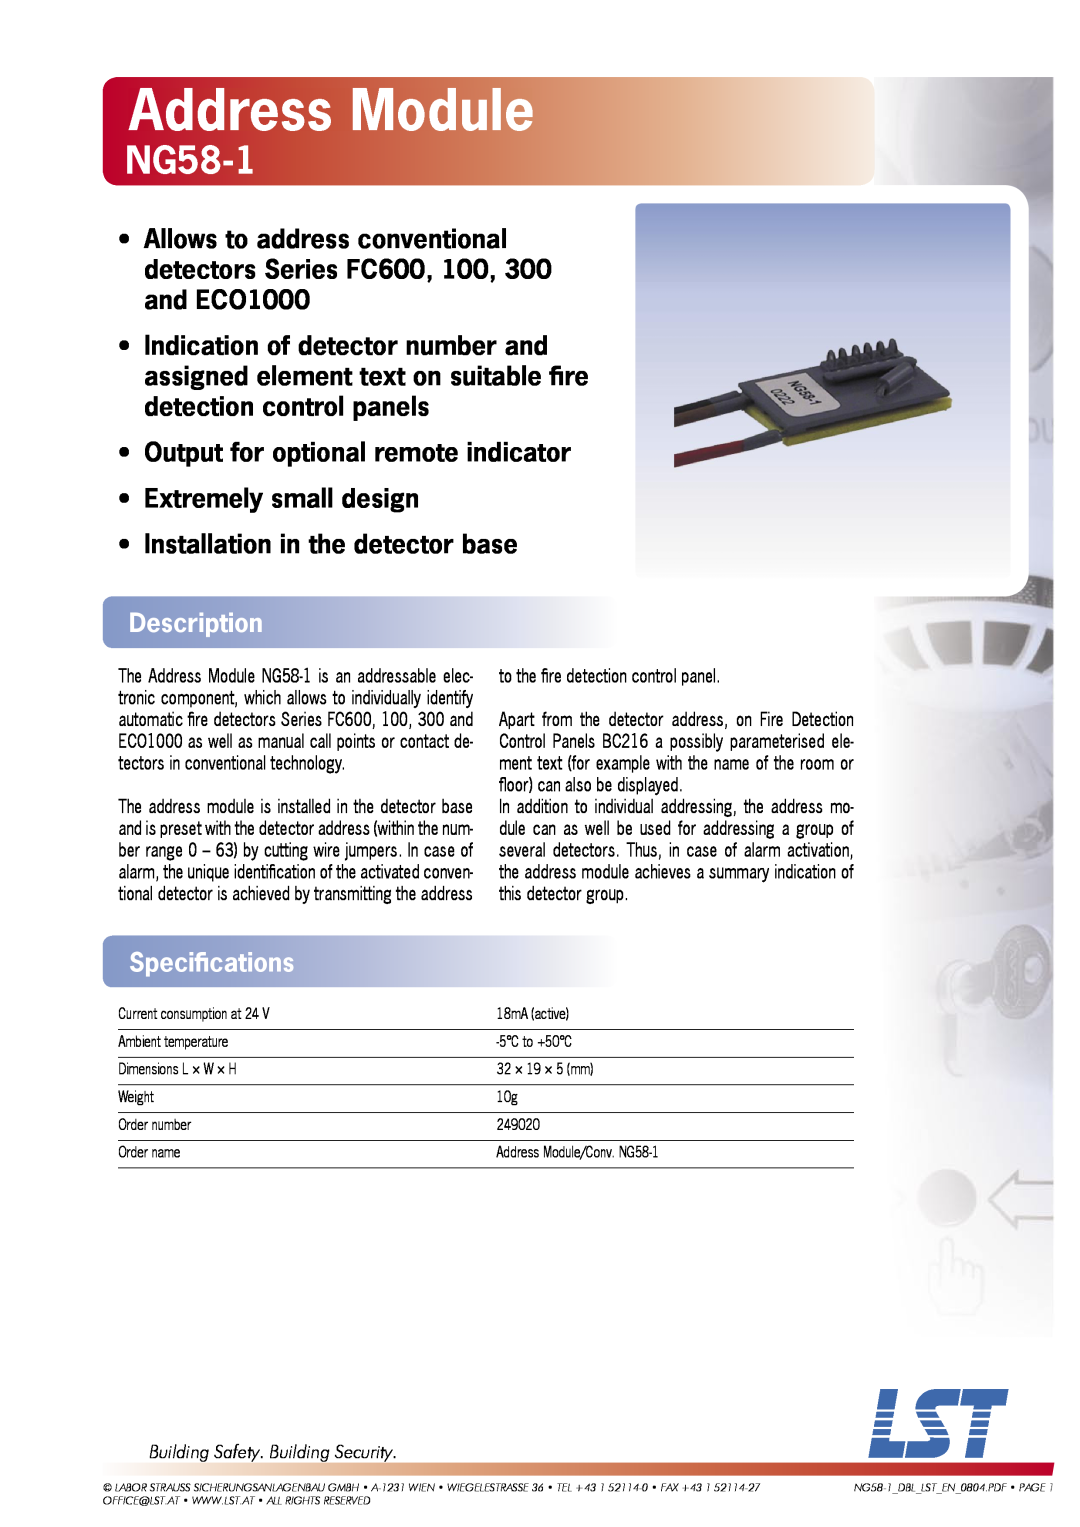 LST 249020 specifications Address Module, NG58-1, •Output for optional remote indicator, Extremely small design 